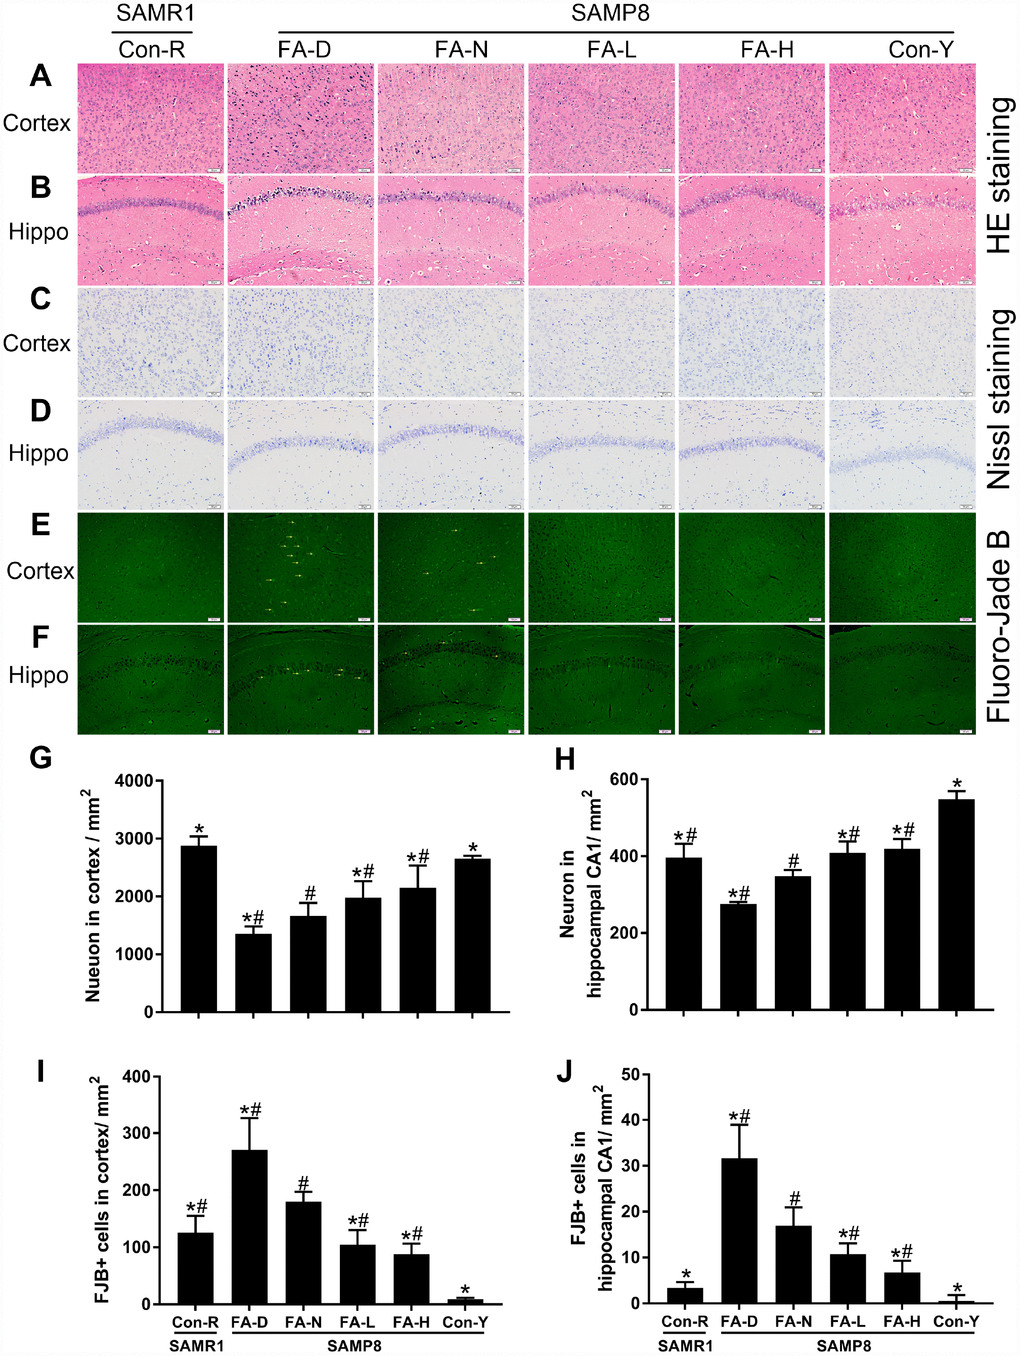 FA supplementation delayed neurodegeneration and stimulated neuronal survival in cerebral cortex and hippocampal CA1 region in SAMP8 mice. Mice were assigned to treatment groups as described in Figure 1. Representative micrographs of HE staining in cerebral cortex (A) and hippocampal CA1 region (B), Nissl staining in cerebral cortex (C) and hippocampal CA1 region (D), Fluoro-Jade B (FJB) staining in cerebral cortex (E) and hippocampal CA1 region (F). Quantitative analysis of surviving neurons indicated by Nissl staining in cerebral cortex [F(5,24) = 30.882, PG) and hippocampal CA1 region [F(5,24) = 68.256, PH), and degenerated neurons indicated by FJB-positive cells in cerebral cortex [F(5,24) = 44.797, PI) and hippocampal CA1 region [F(5,24) = 45.630, PJ). Yellow arrow indicates FJB positive cell. Scale bar = 50 μm. Data are expressed as mean ± SD (n= 5 mice/group). *P#P